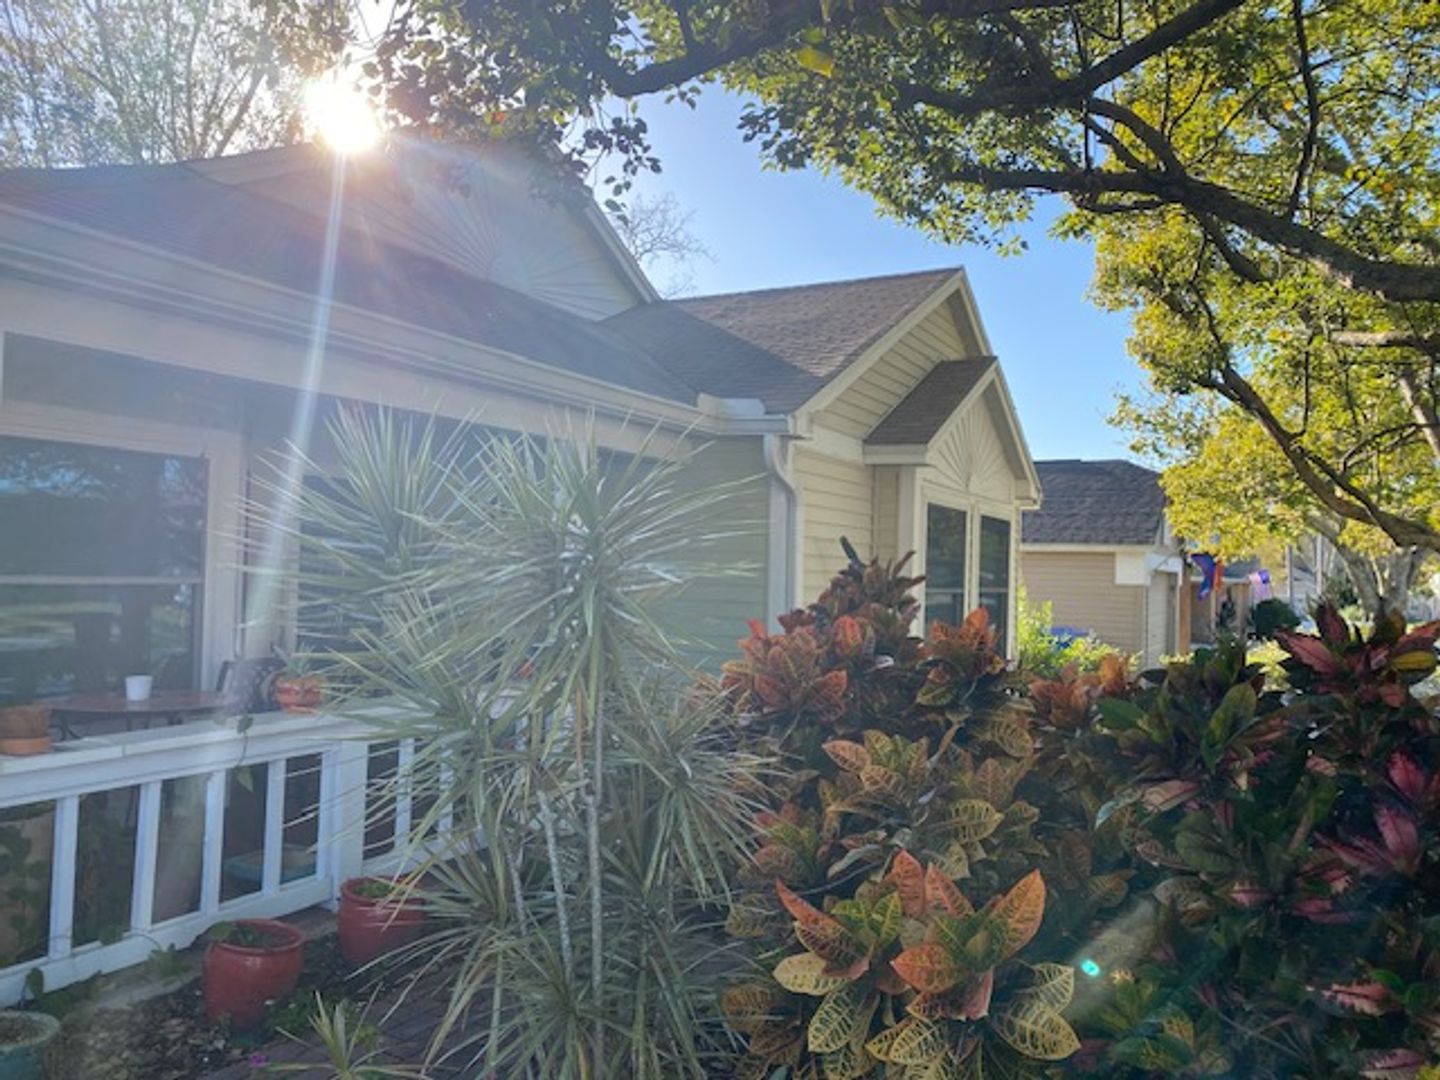 Florida living at its finest with the 3 bedroom 2 bath home!